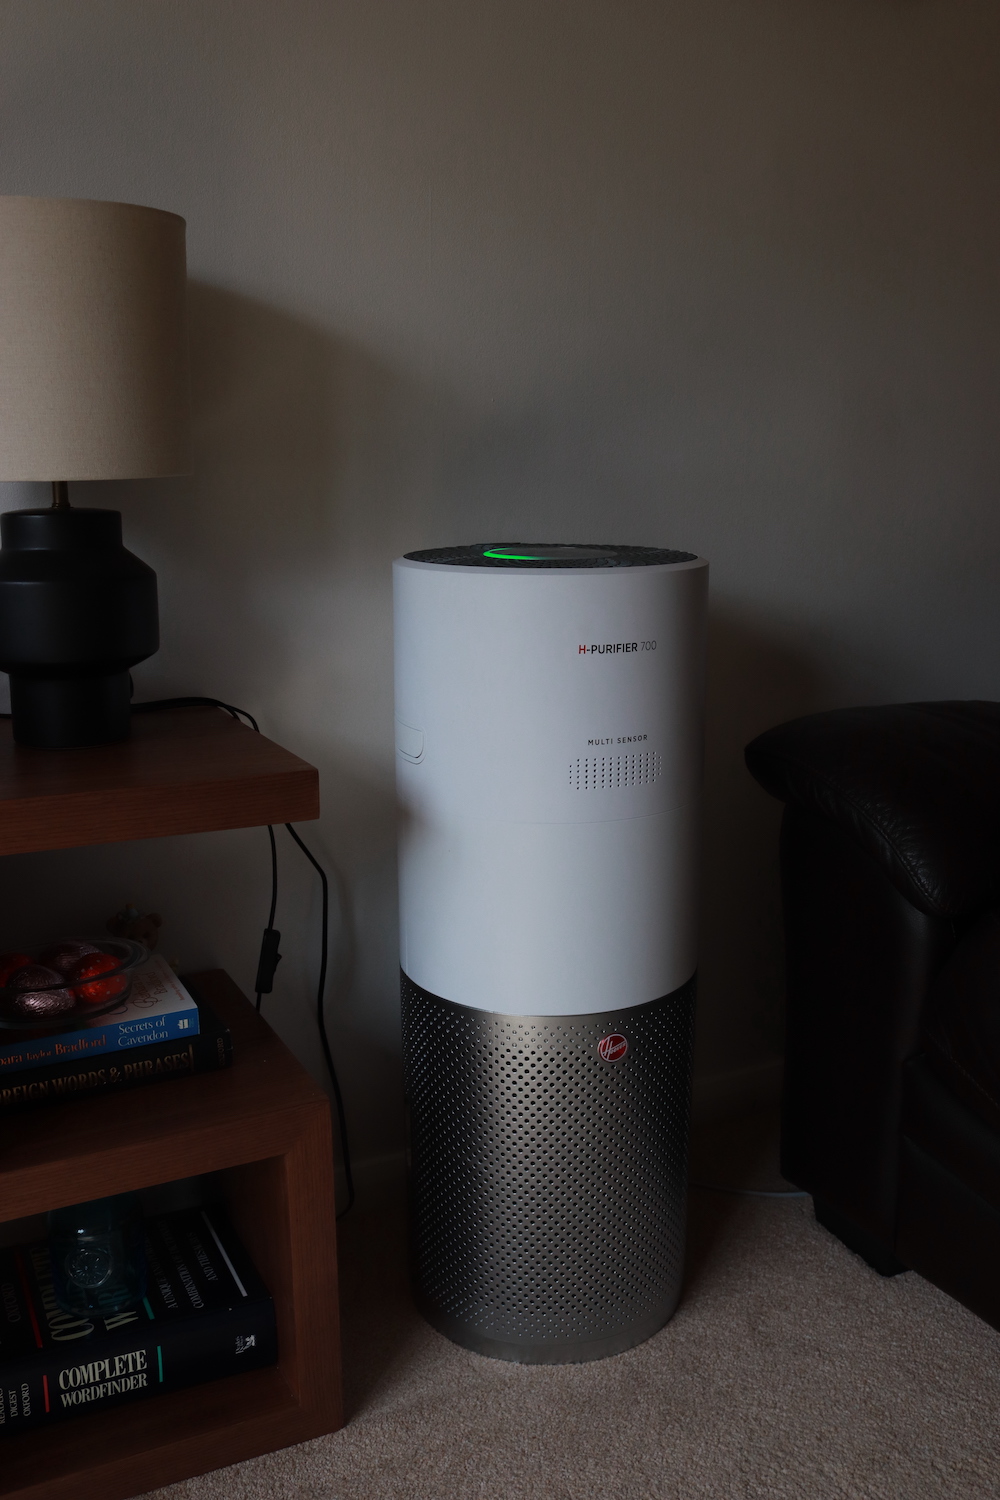 Clean the air in your home with the Hoover H-Purifier 700